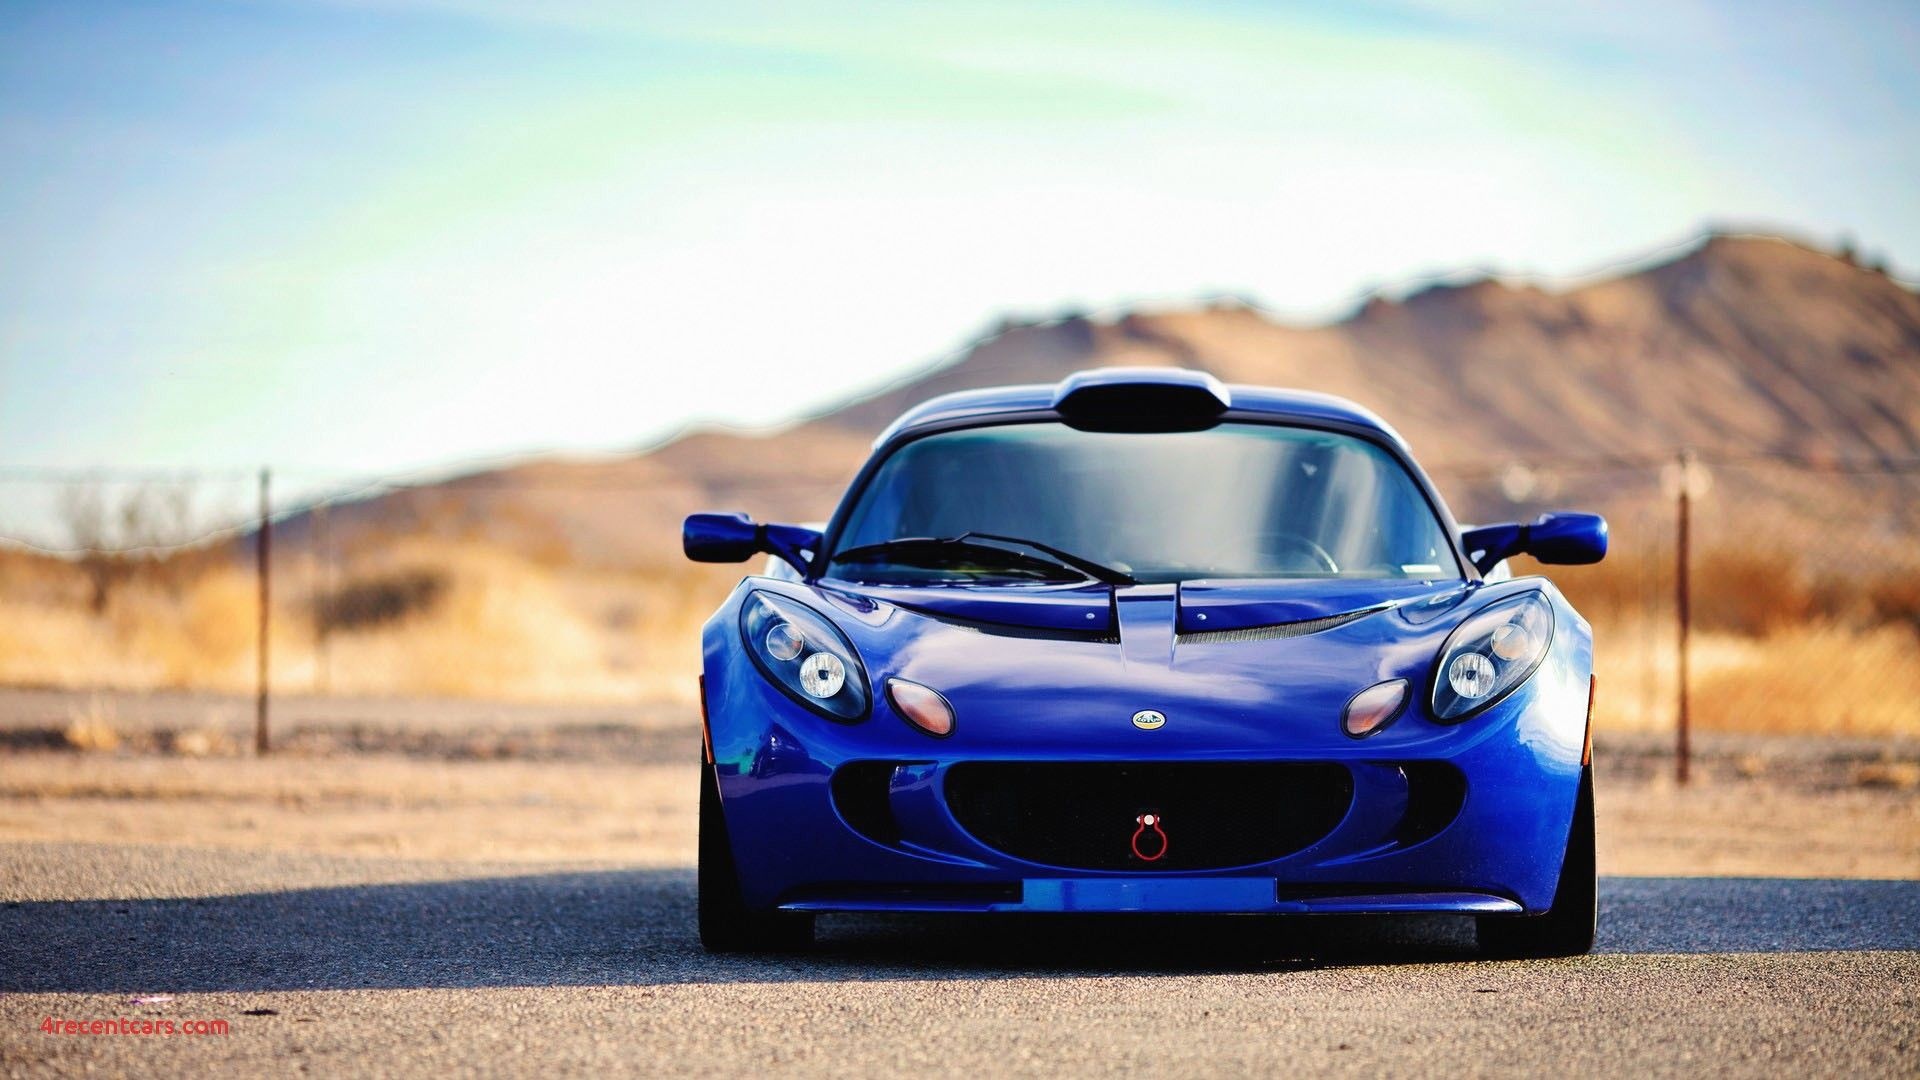 Lotus Exige, Top car wallpapers, High-quality backgrounds, Automotive beauty, 1920x1080 Full HD Desktop